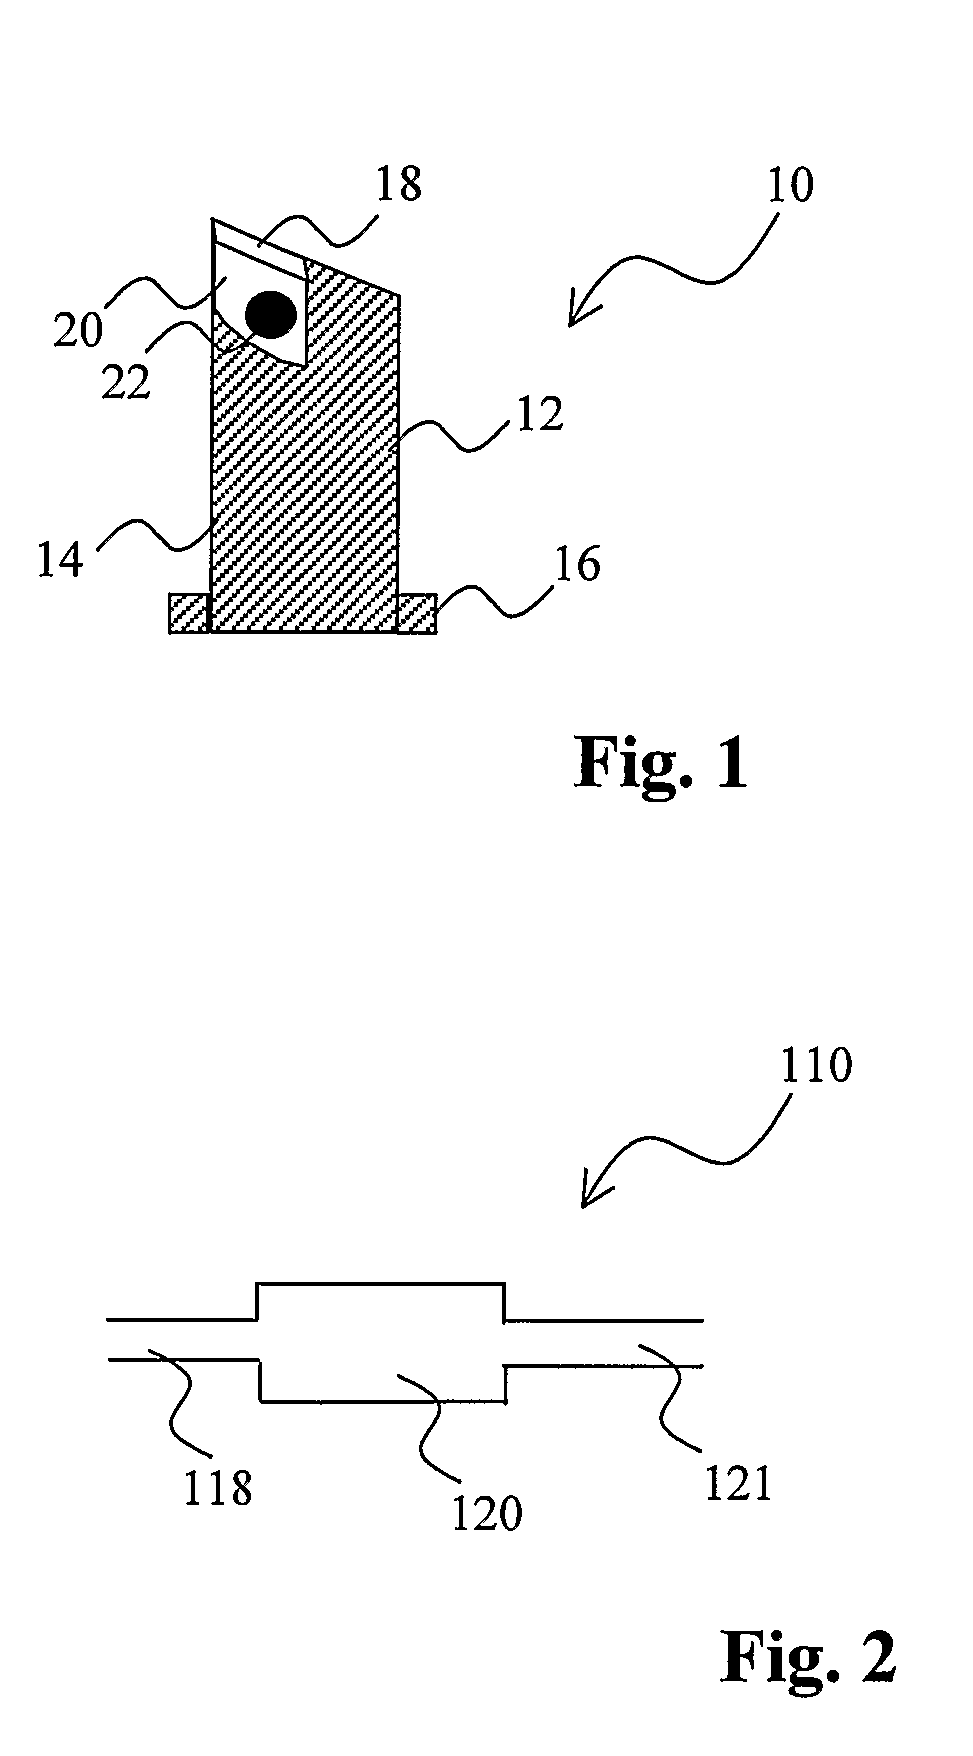 Method, Device and System for Volumetric Enumeration of White Blood Cells